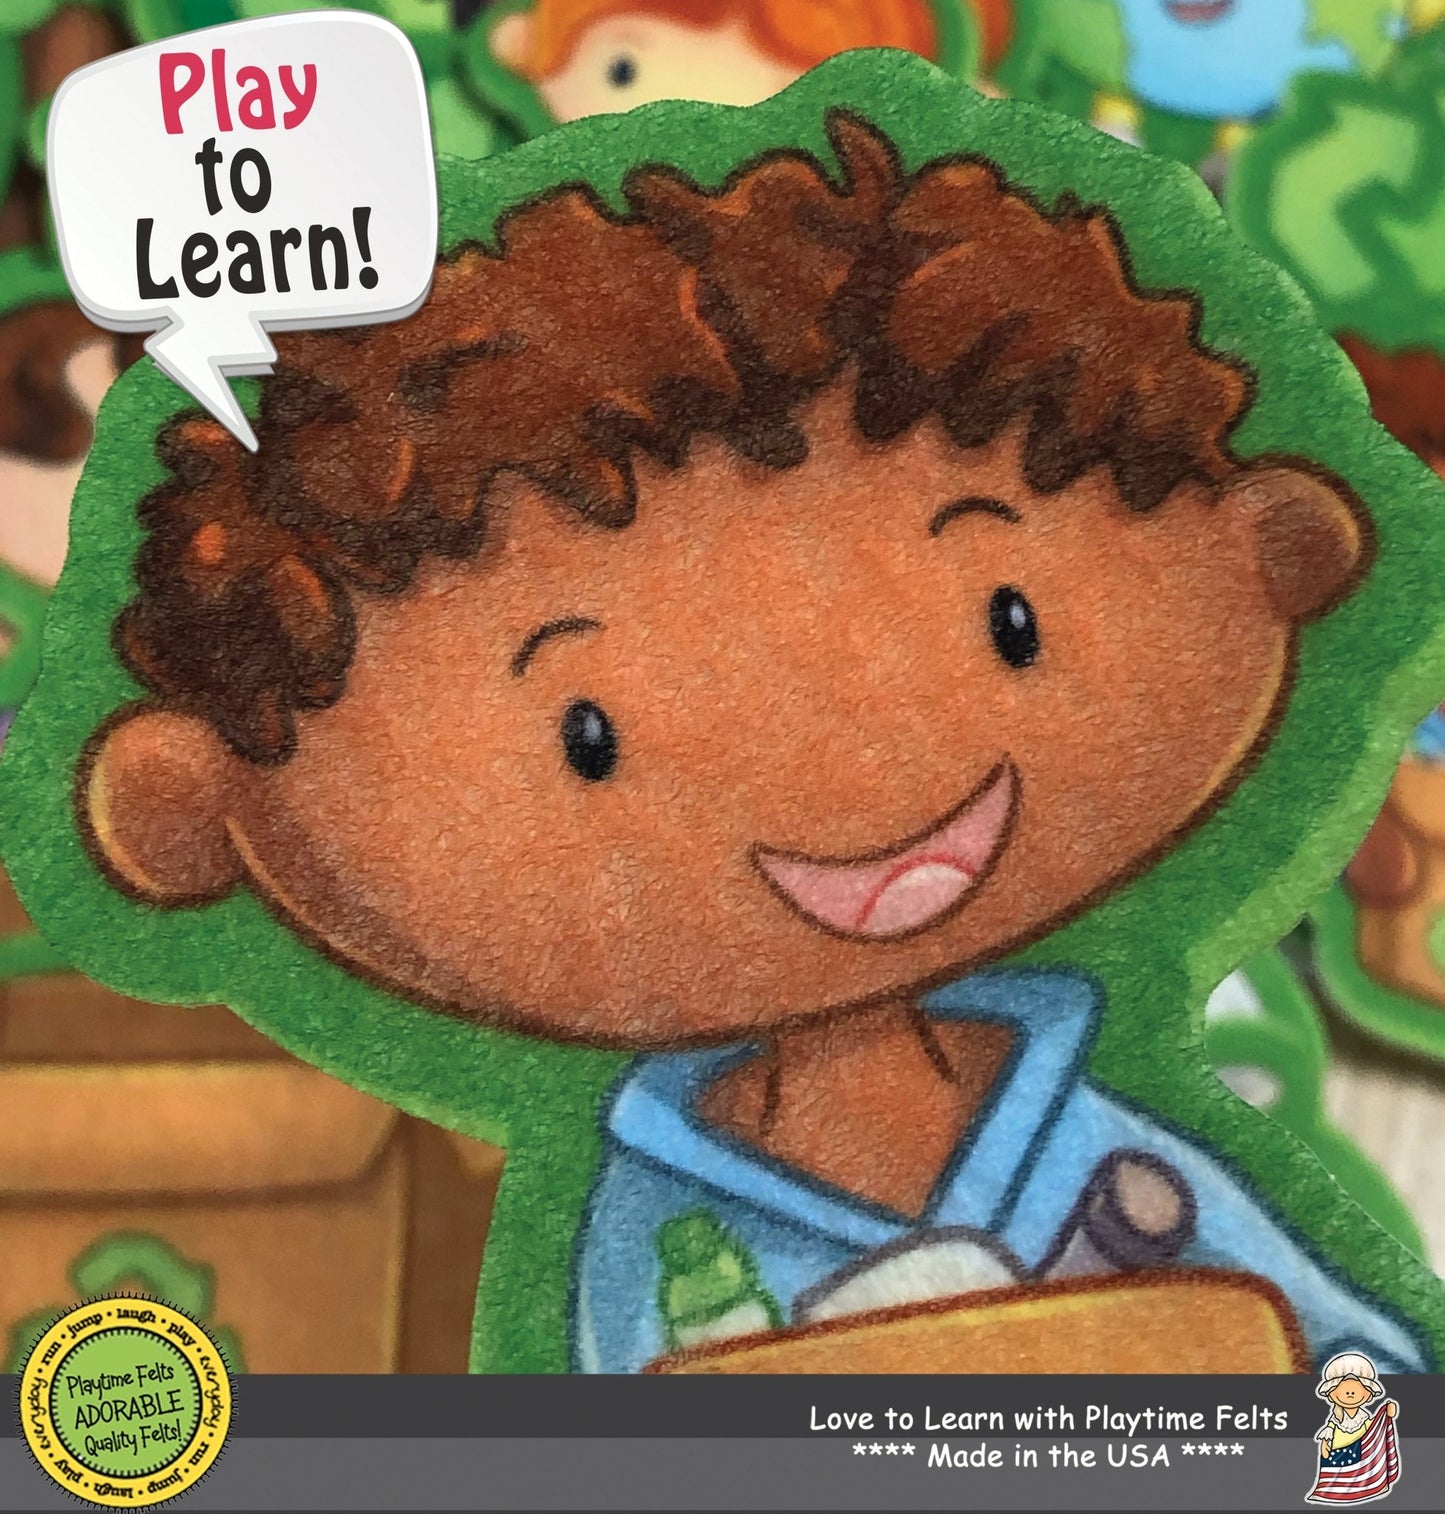 Earth Day Every Day Felt Board Story for Preschoolers - Felt Board Stories for Preschool Classroom Playtime Felts